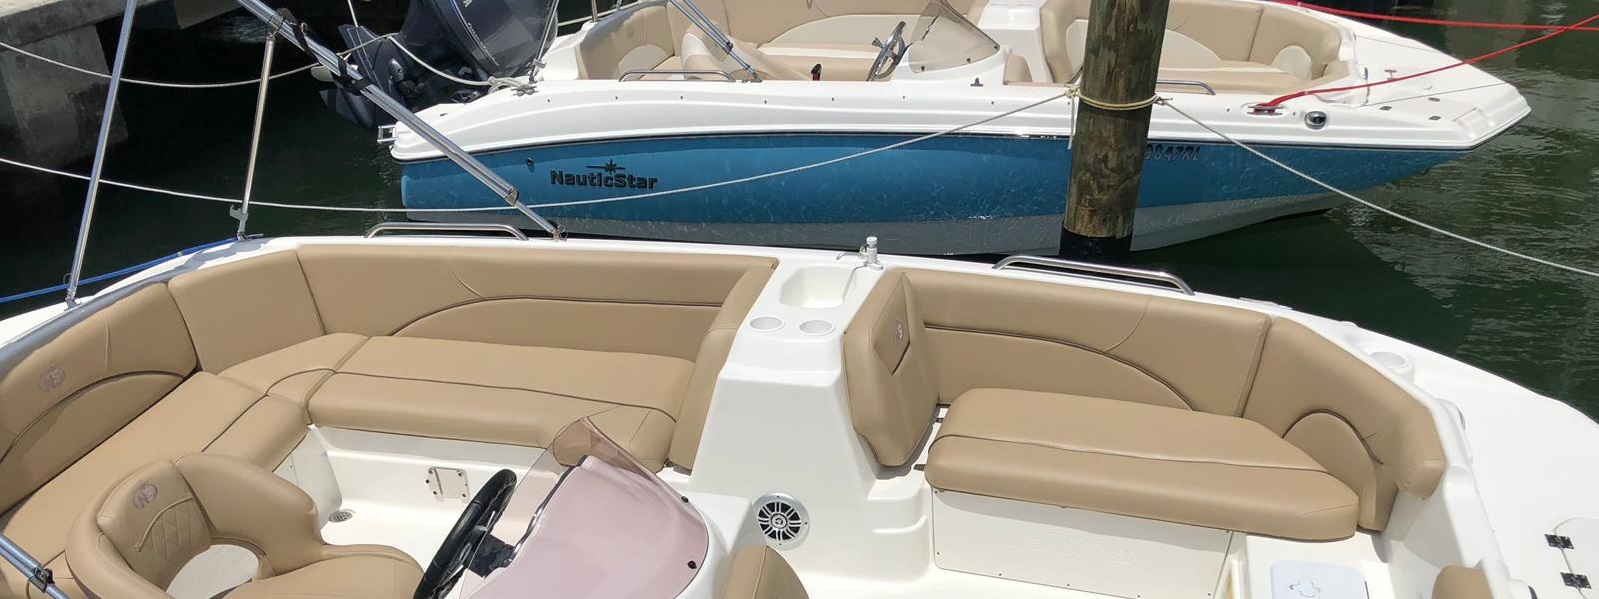 Boat for Rent in Miami Six Full Hours